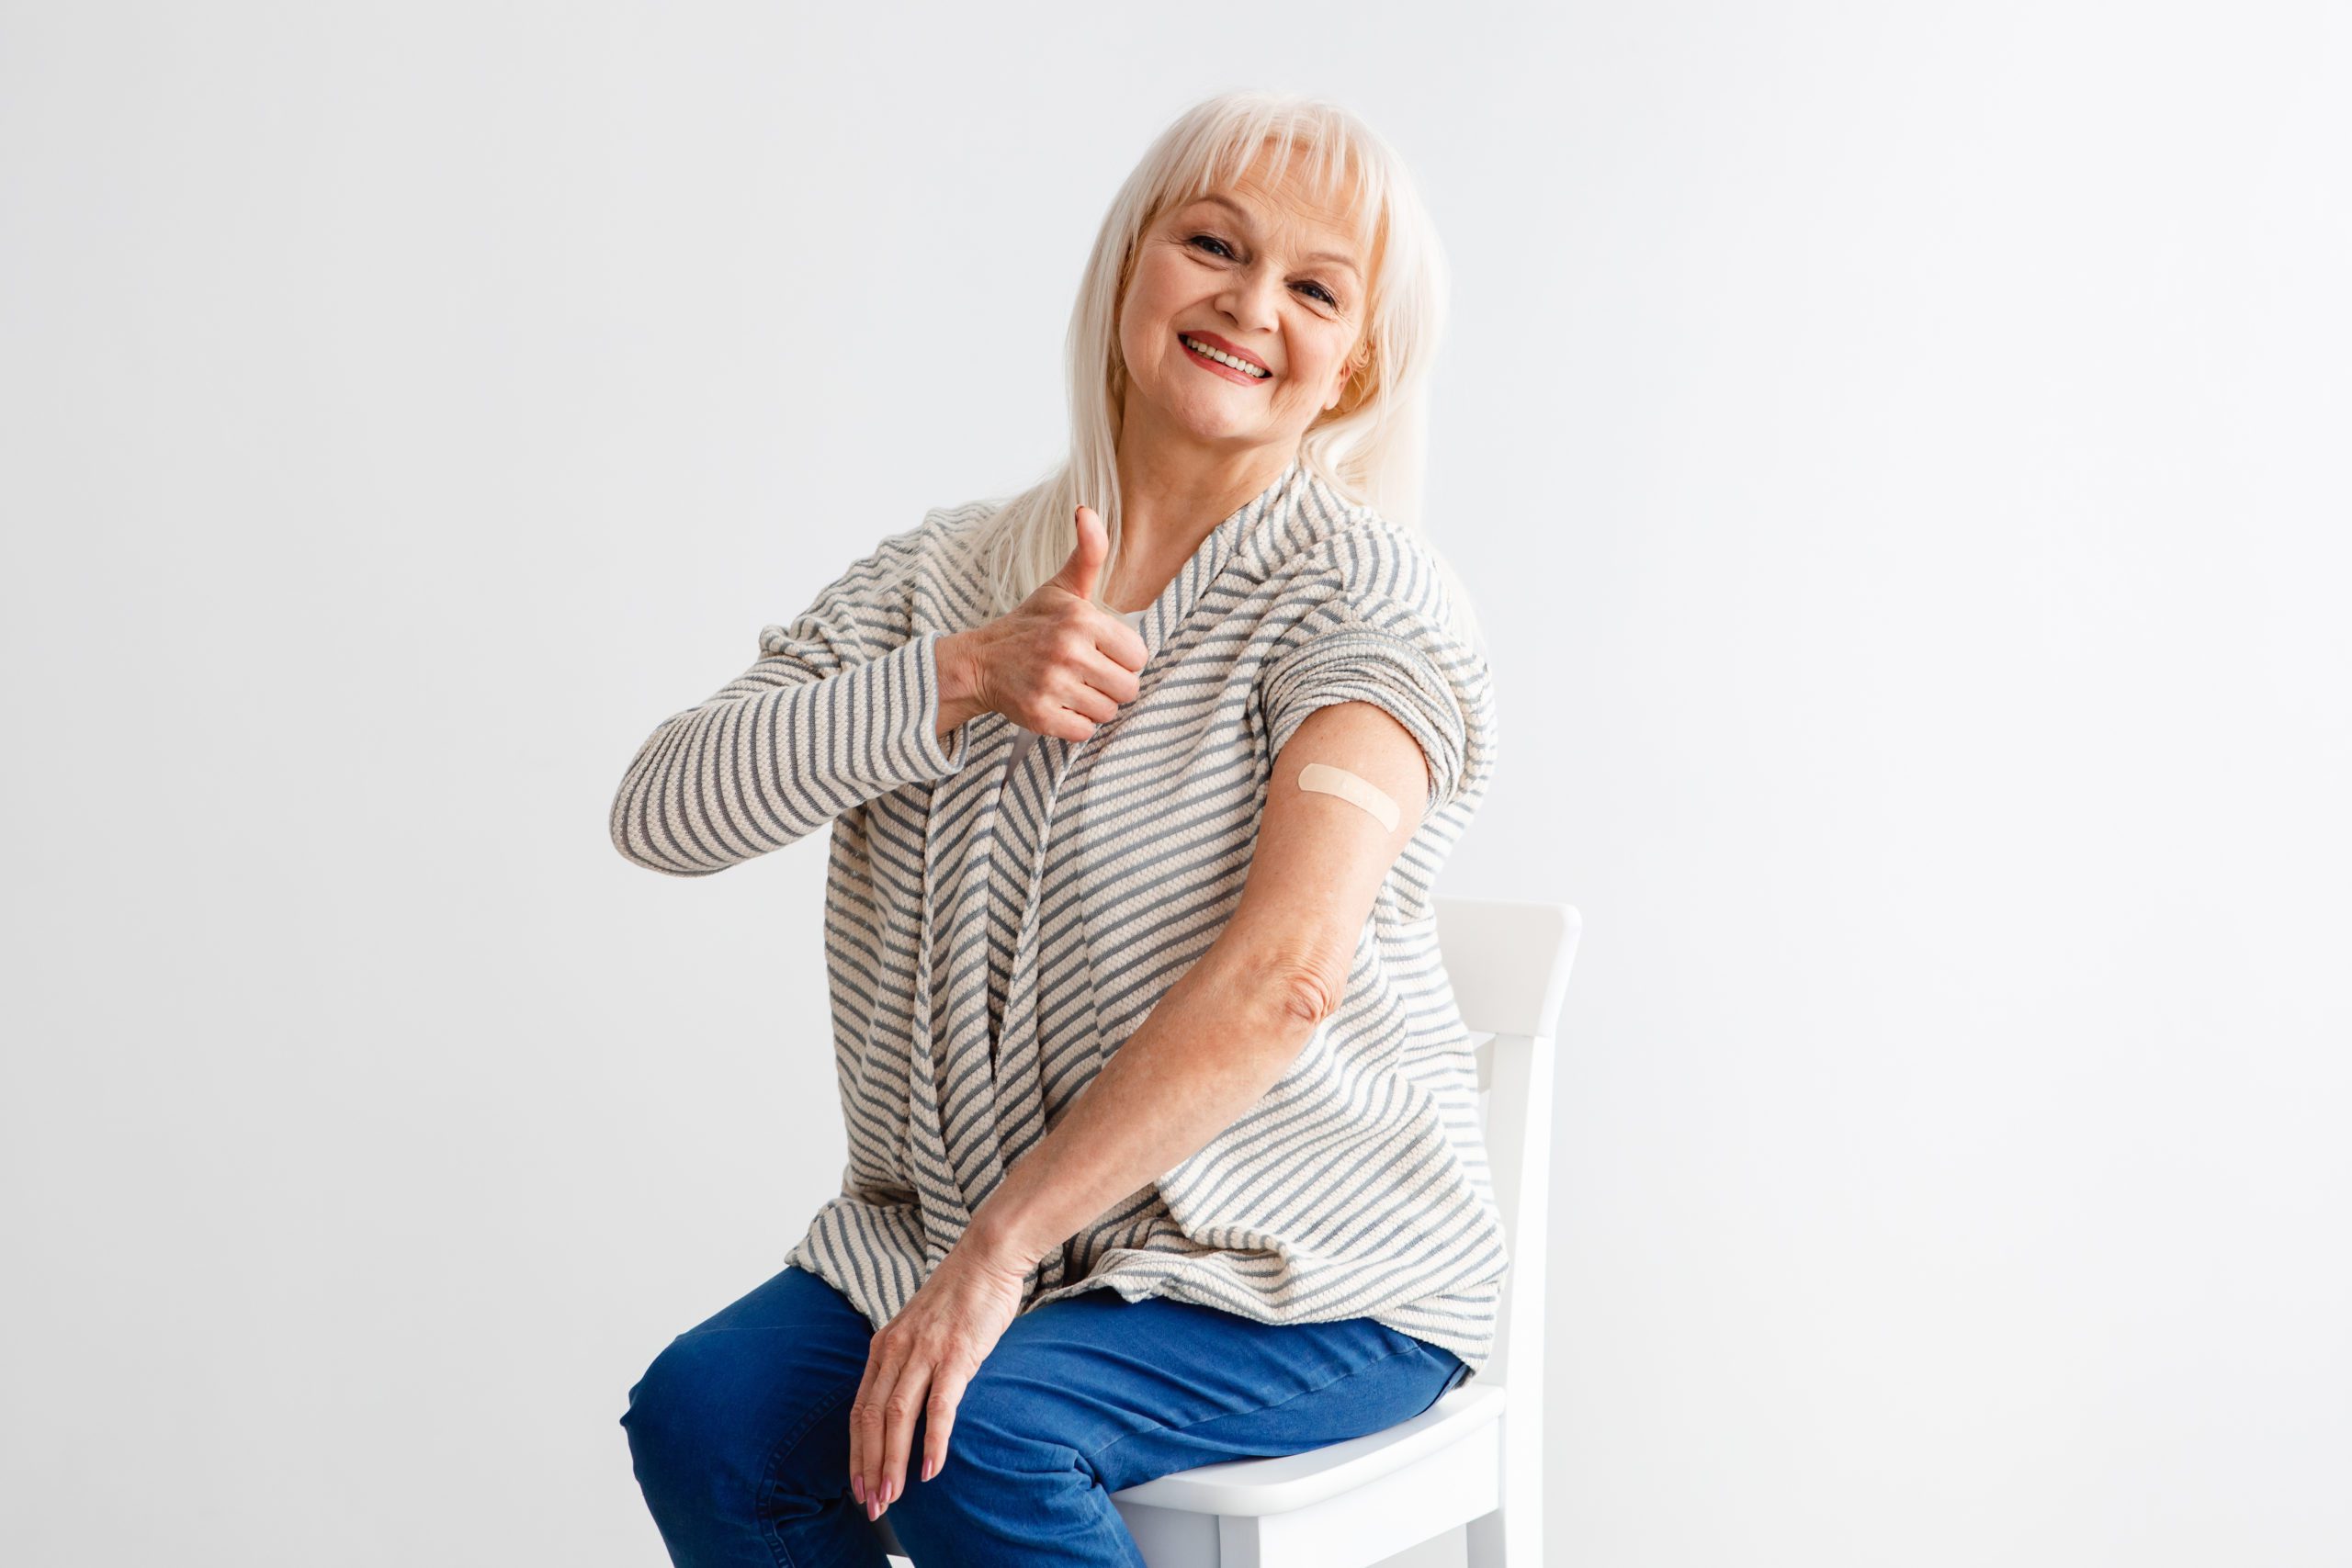 Happy Vaccinated Mature Lady Gesturing Thumbs-Up Over White Background